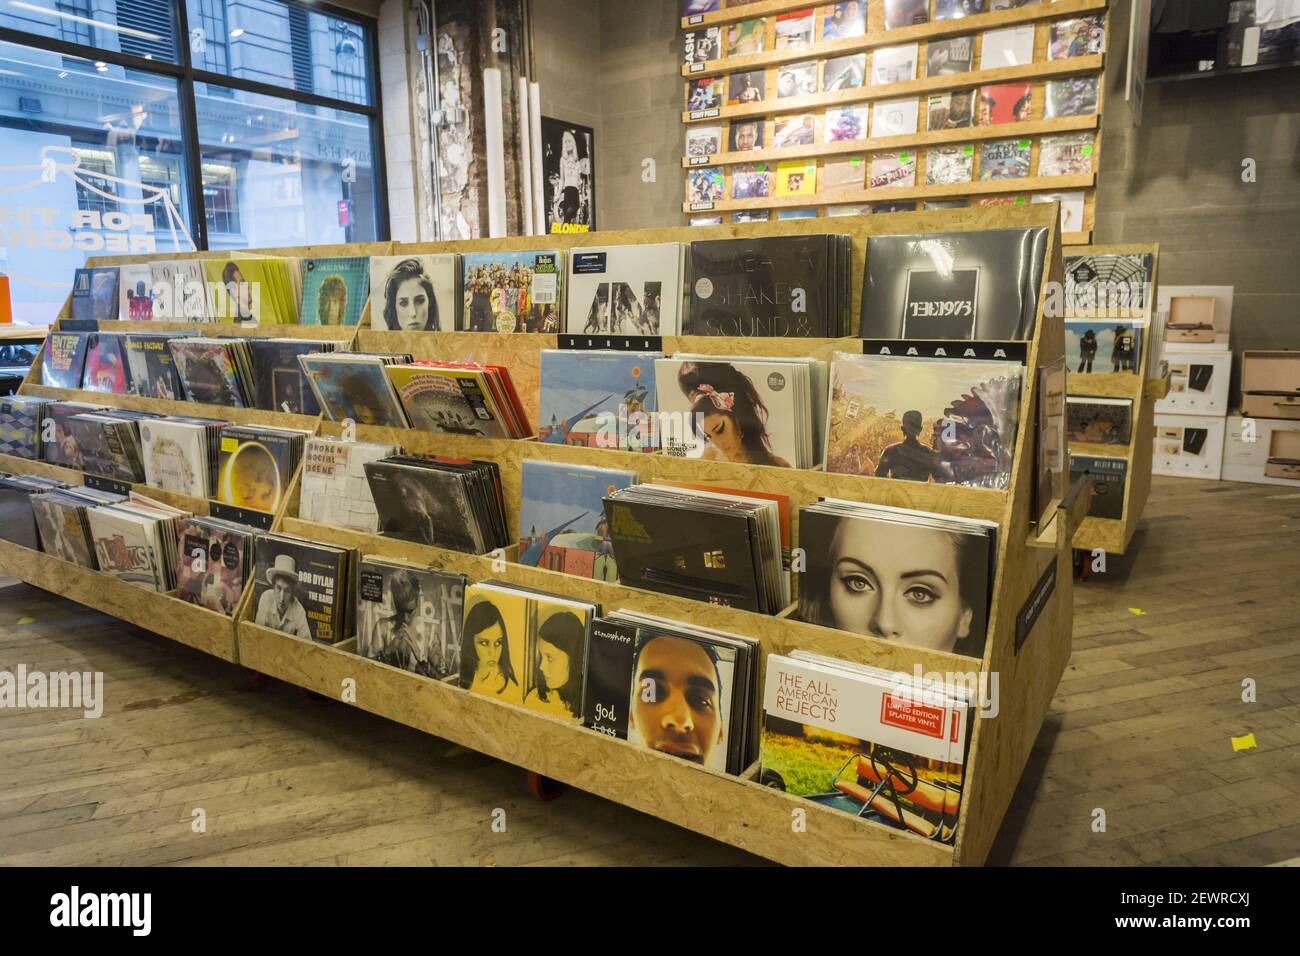 elevation Valnød tørst Latching onto the increasing popularity of vinyl records the Urban  Outfitters retail store carries a selection of LP's, in Herald Square in  New York on Tuesday, May 18, 2016. Sony announced that